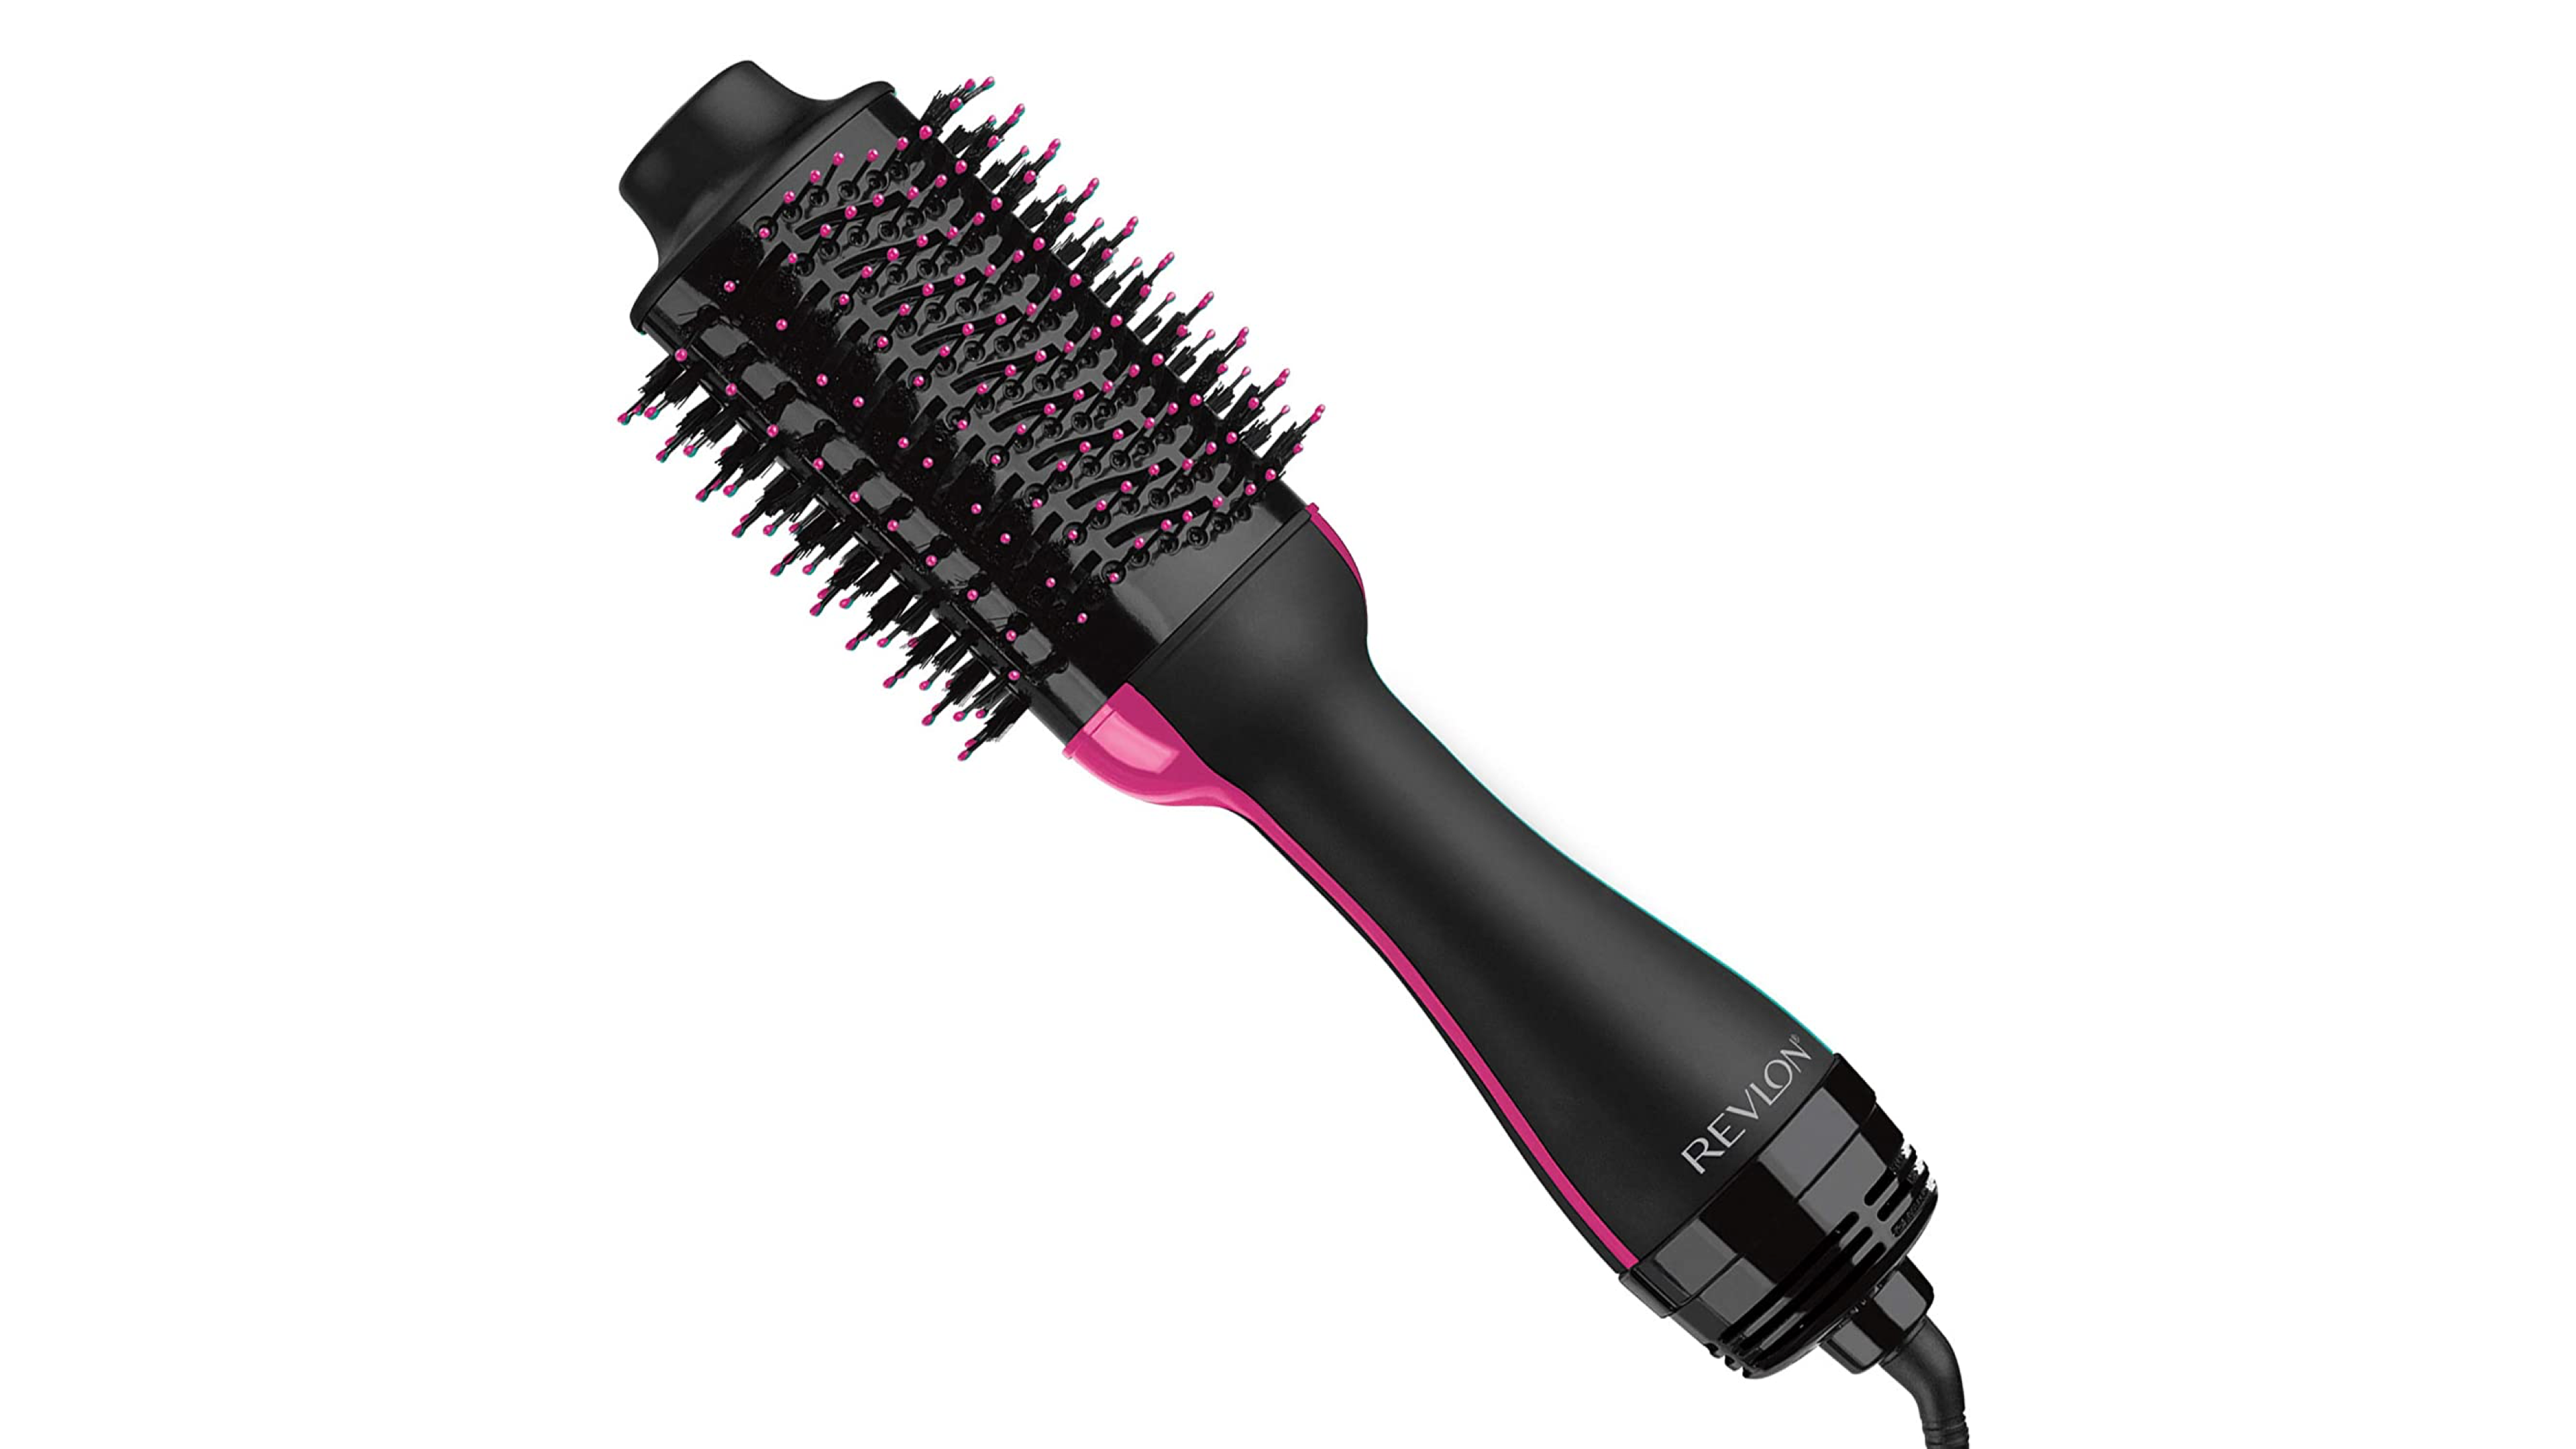 revlon blow-dryer brush that can give you a salon-like blow-out in a fraction of the time